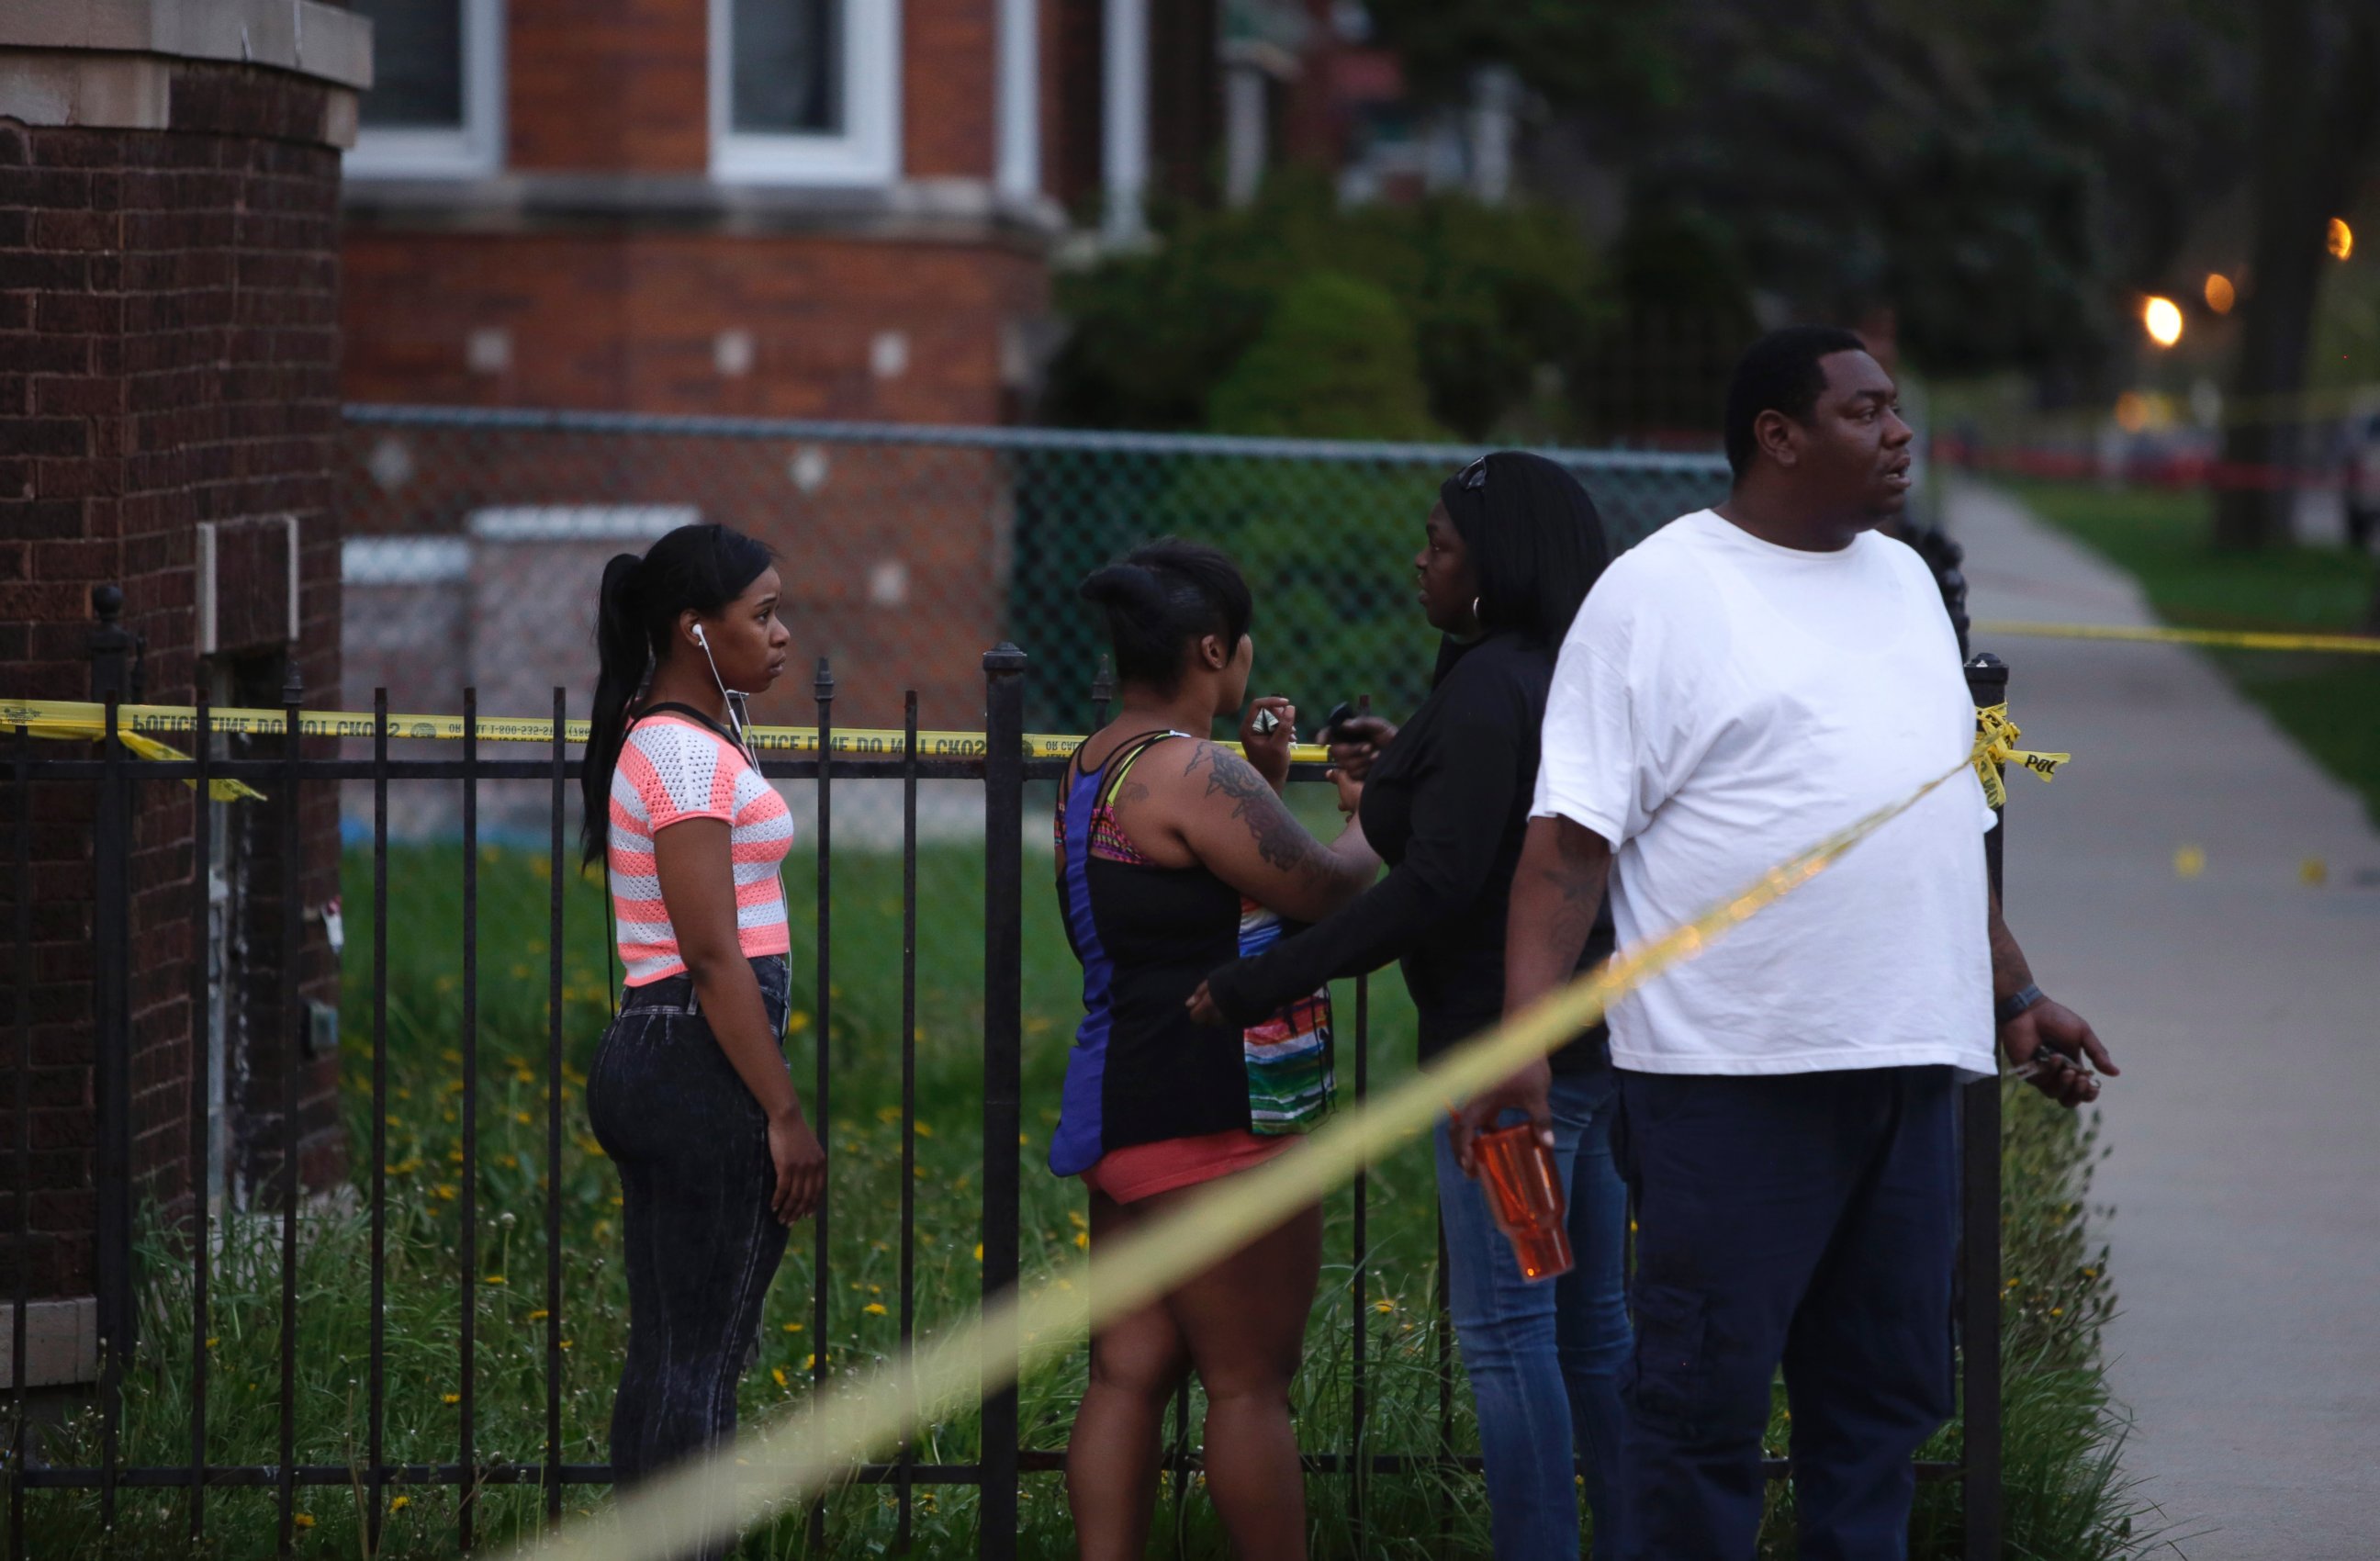 PHOTO: People watch as Chicago Police officers and evidence technicians investigate the scene where a 16-year-old boy was shot in the head and killed and another 18-year-old man was shot and wounded on April 25, 2016, in Chicago.